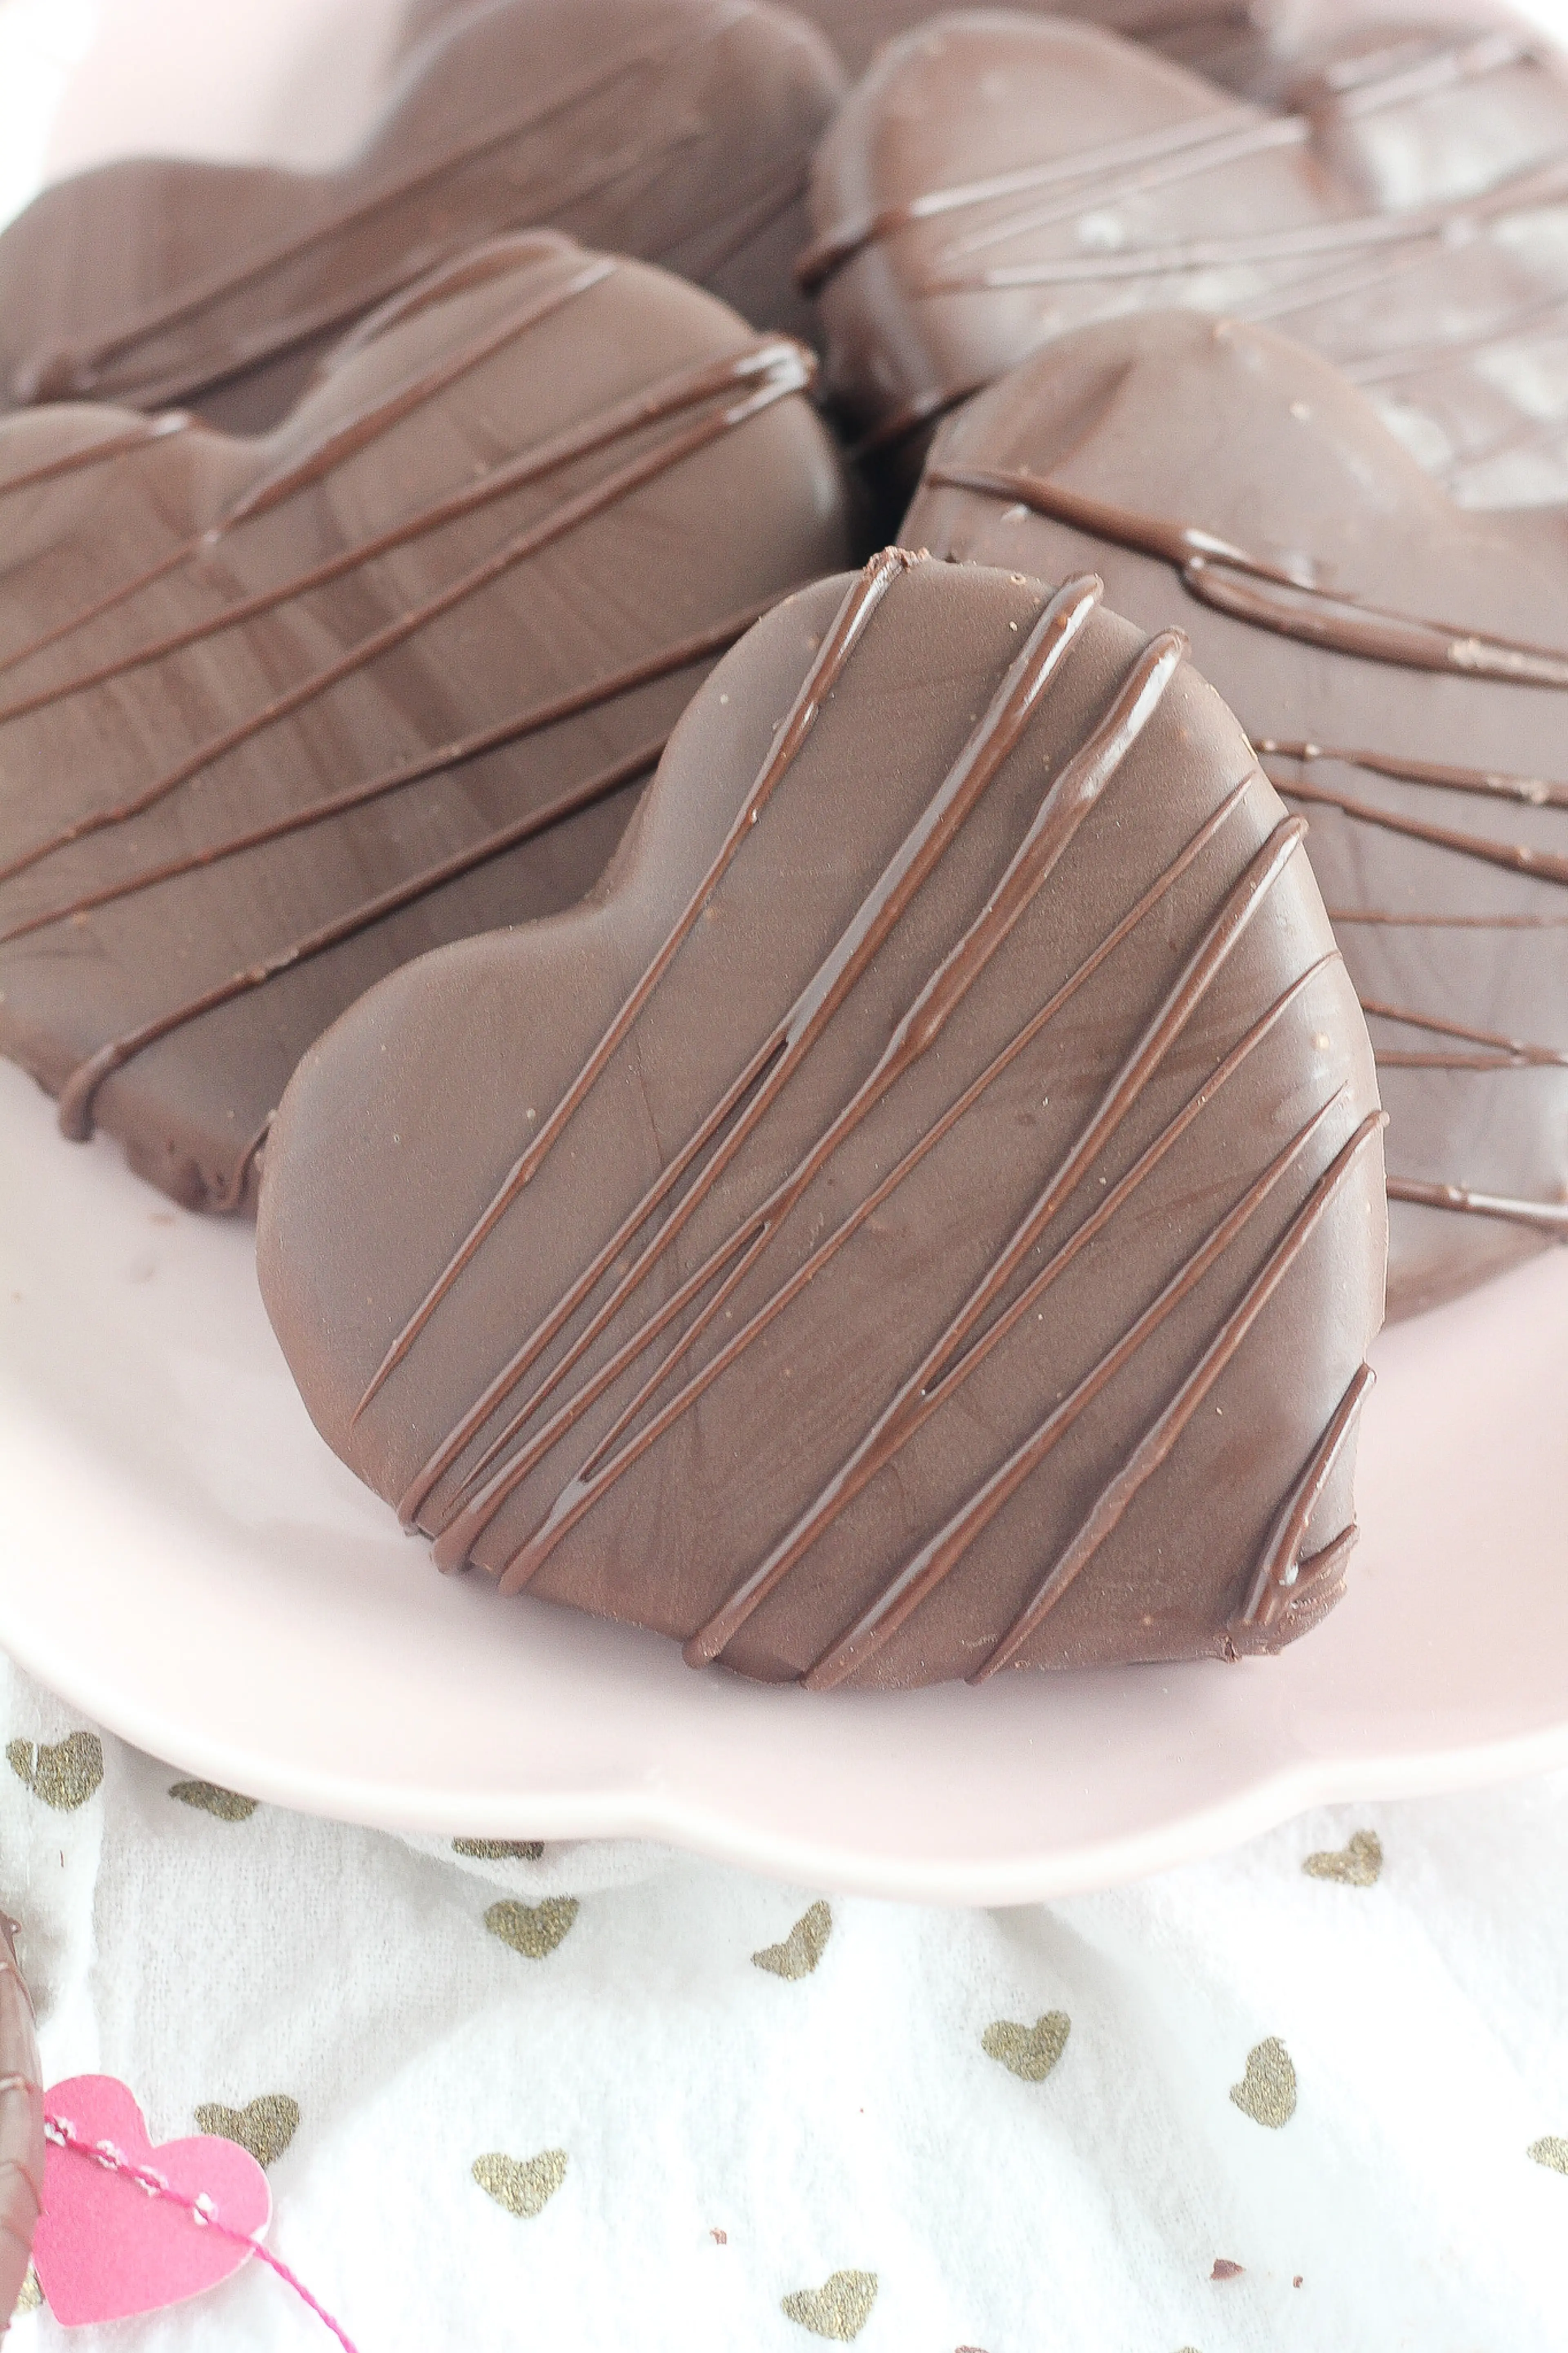 Easy Chocolate Covered Peanut Butter Hearts